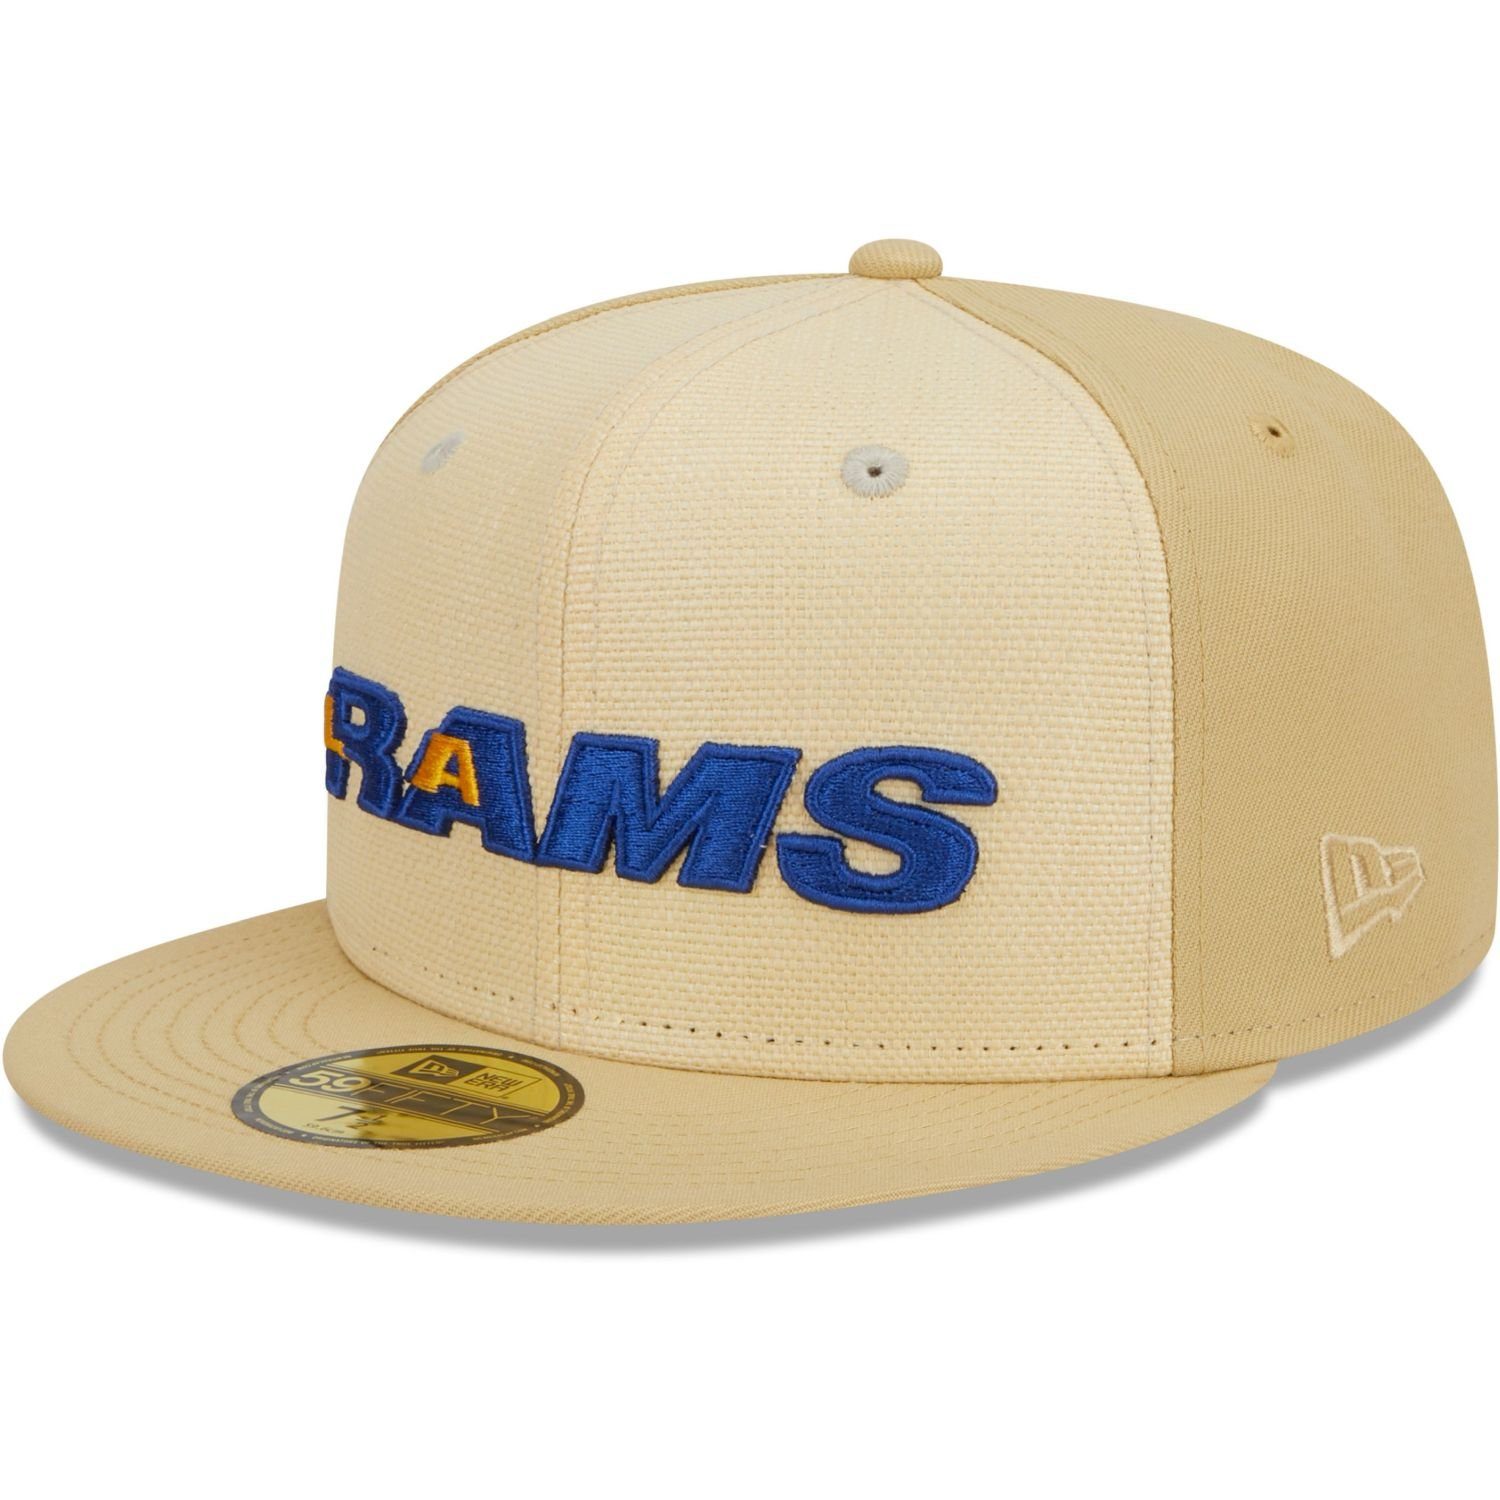 Era Los Cap Angeles 59Fifty New RAFFIA Rams Fitted